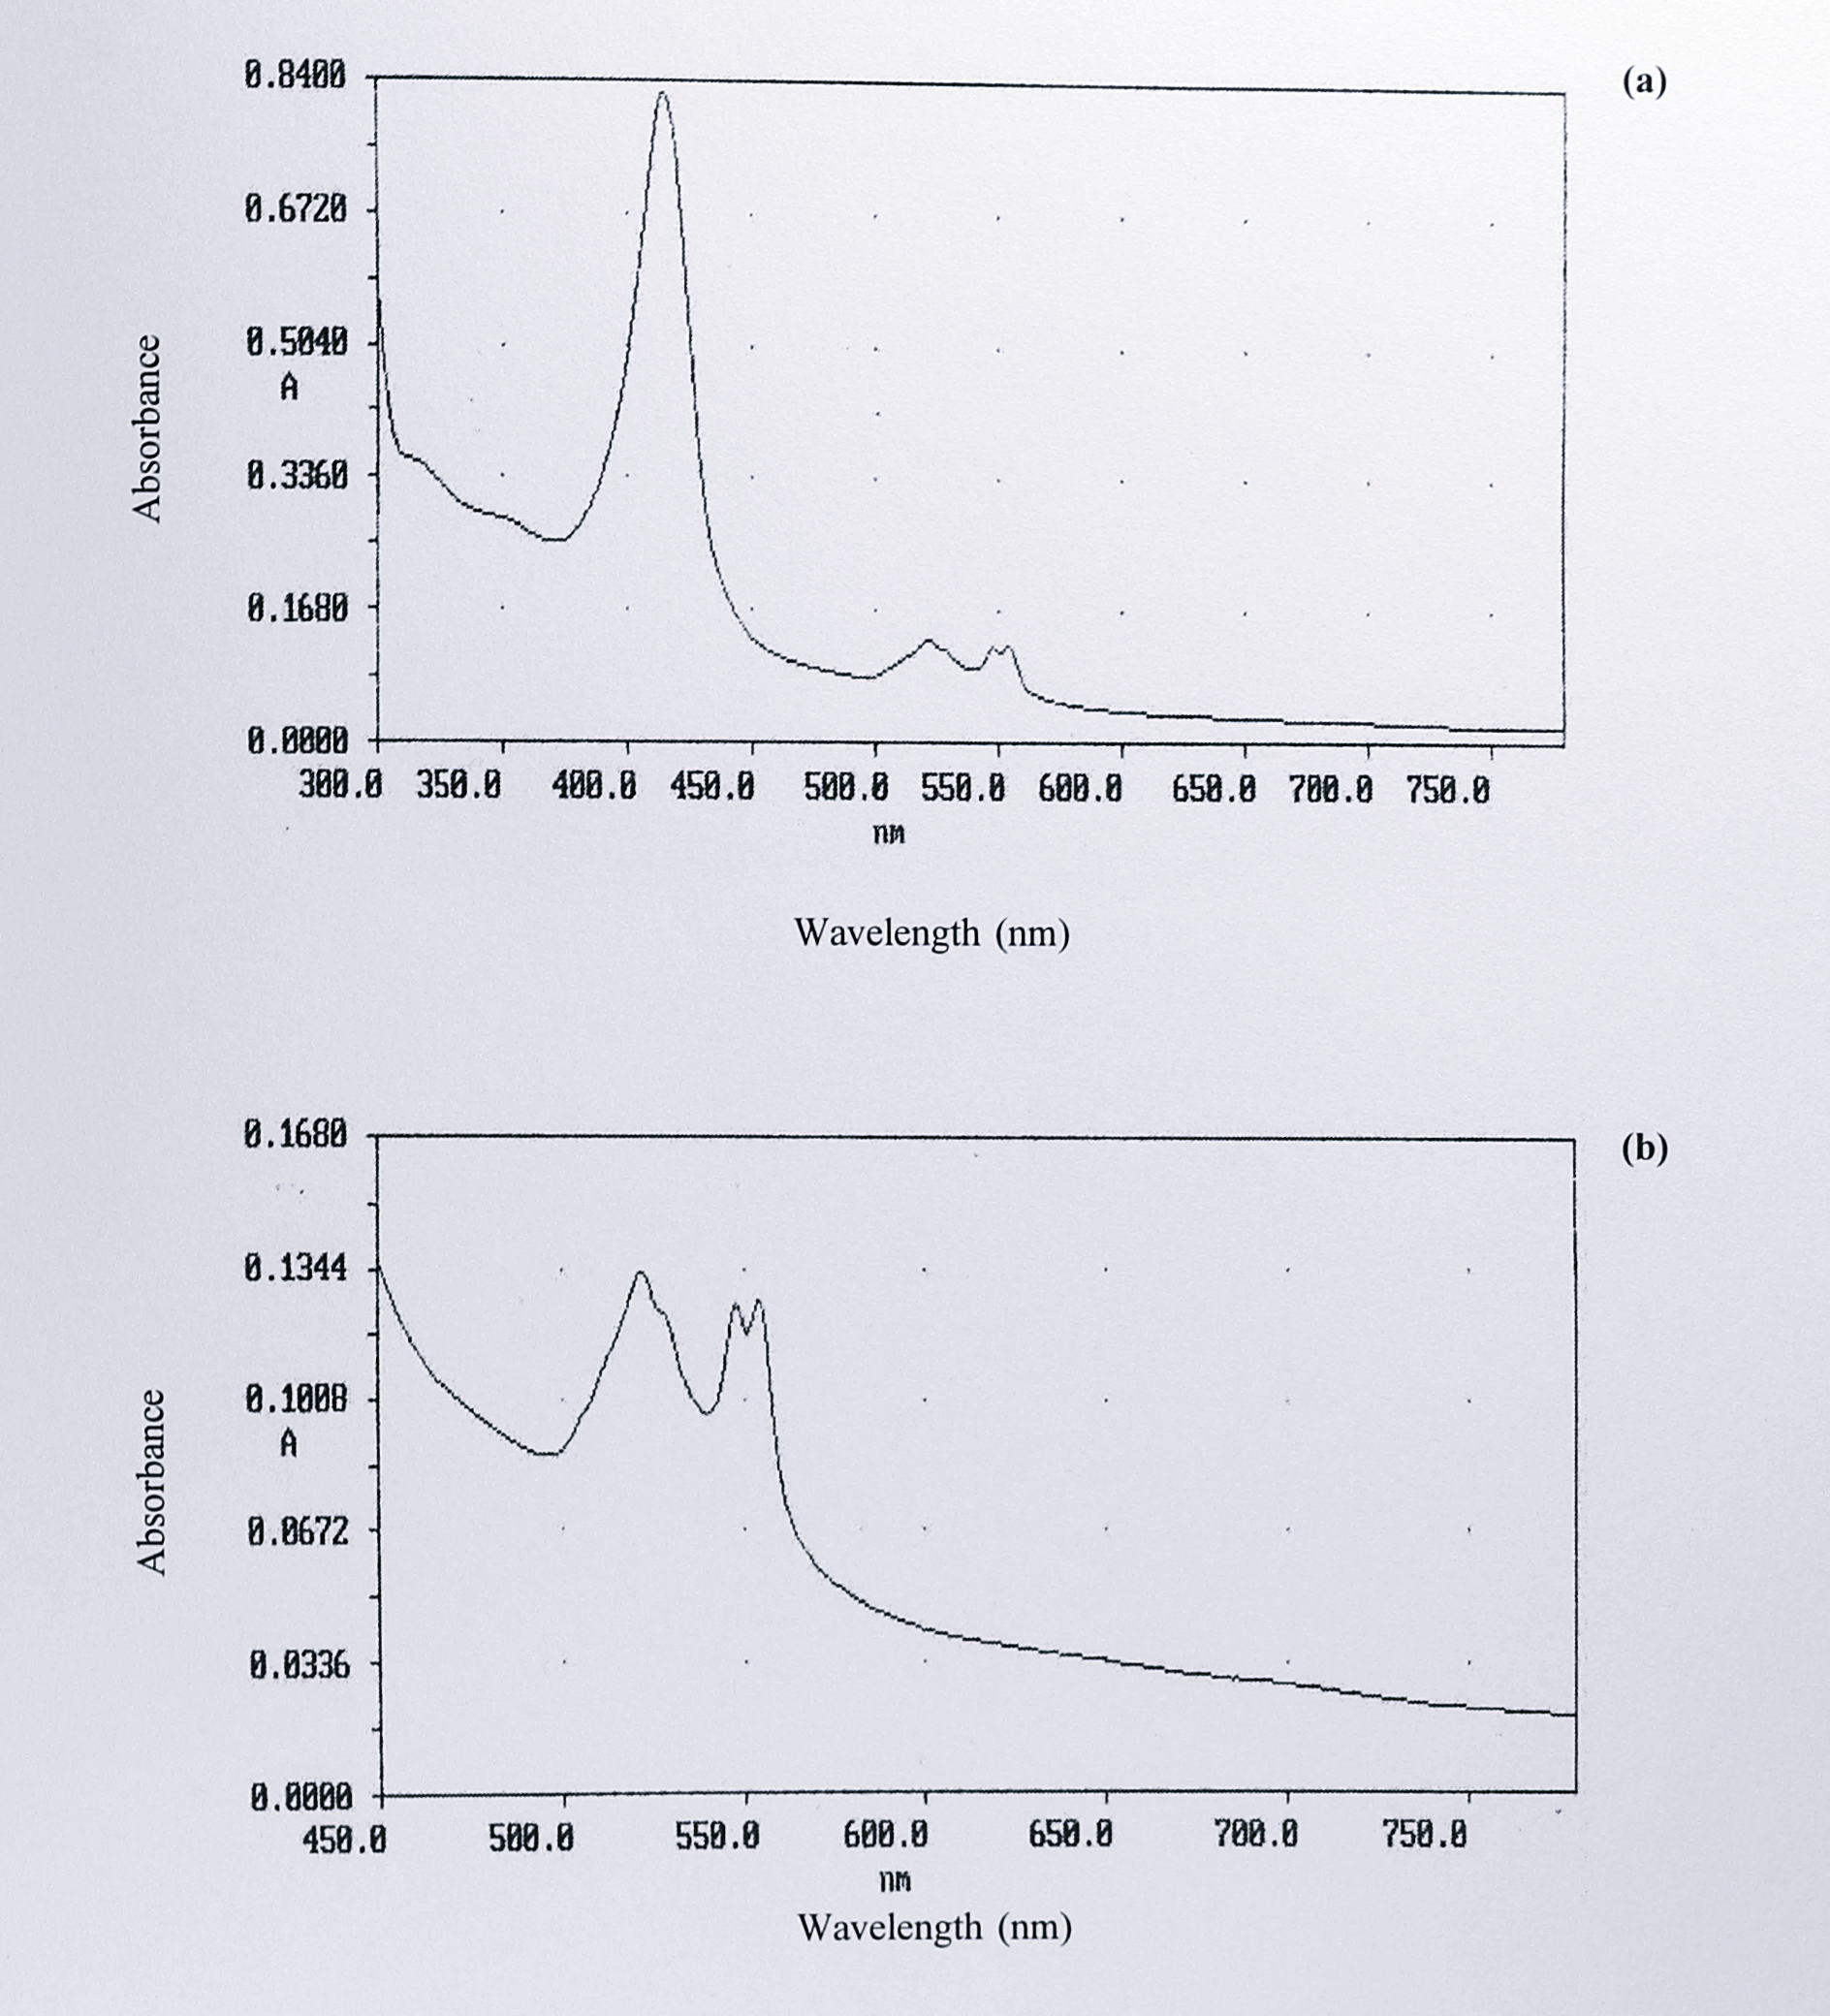 UV-visible spectrum of concentrated fractions eluting under peak 2 following DEAE-Sepharose chromatography. Five fractions from the top of peak 2 (Figure 5.7) were pooled and concentrated to approximately 1 ml by centrifugation in an Amicon-30 microconcentrator Absorbance maxima were observed at 289 (not shown), 415, 522 548 and 554 nm. (b) is an expansion of the region from 440-800 nm in (a), showing the split $\alpha$-peak and the absence of _d_$_1$ haem absorbance features. No change in the spectrum was observed on the addition of sodium dithionite (not shown).